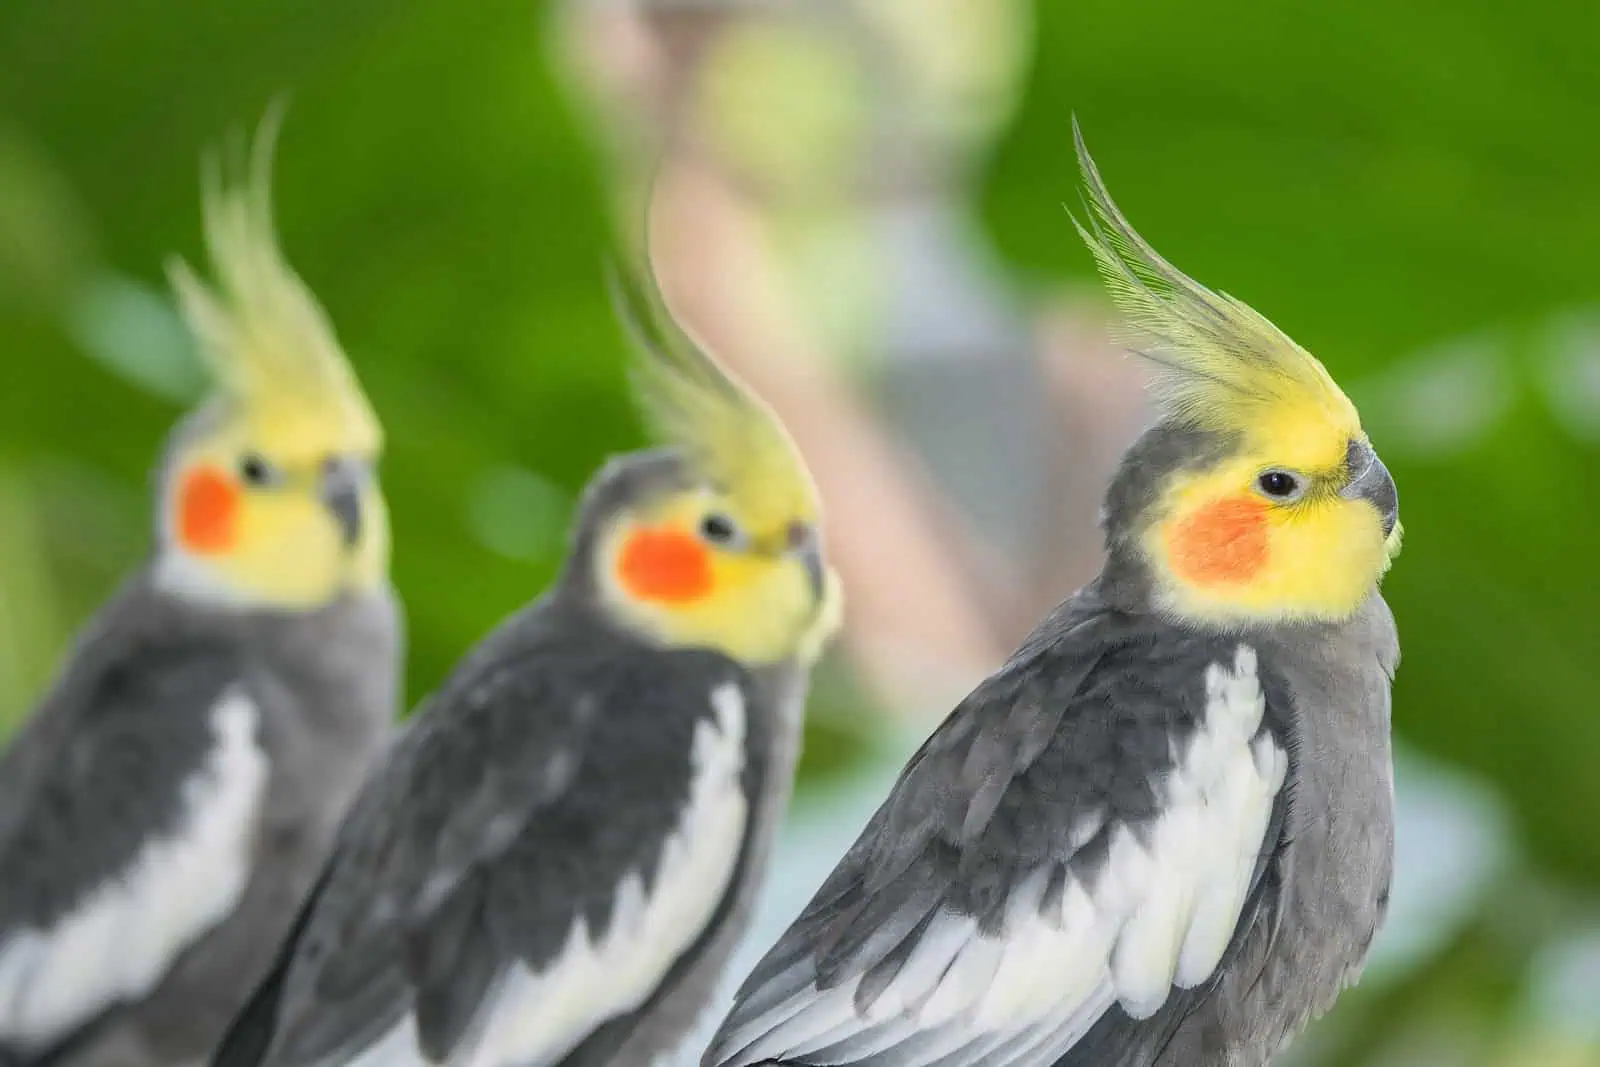 three cockatiel birds with yellow and grey feathers are standing next to each other